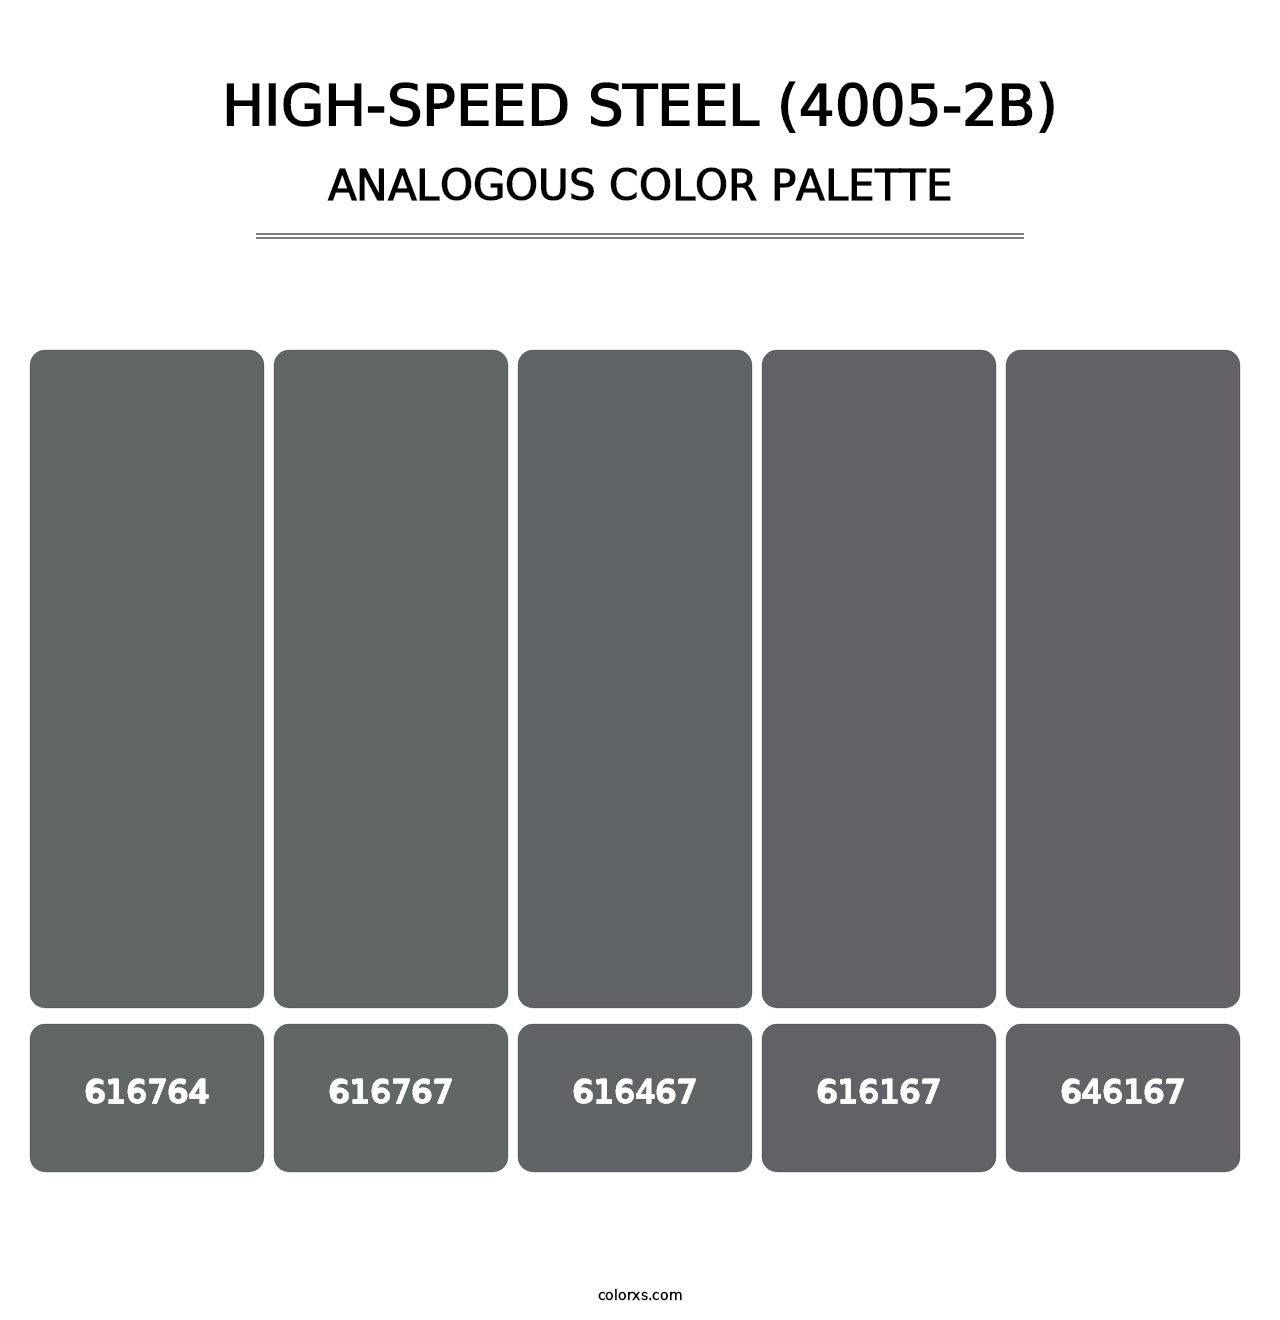 High-Speed Steel (4005-2B) - Analogous Color Palette